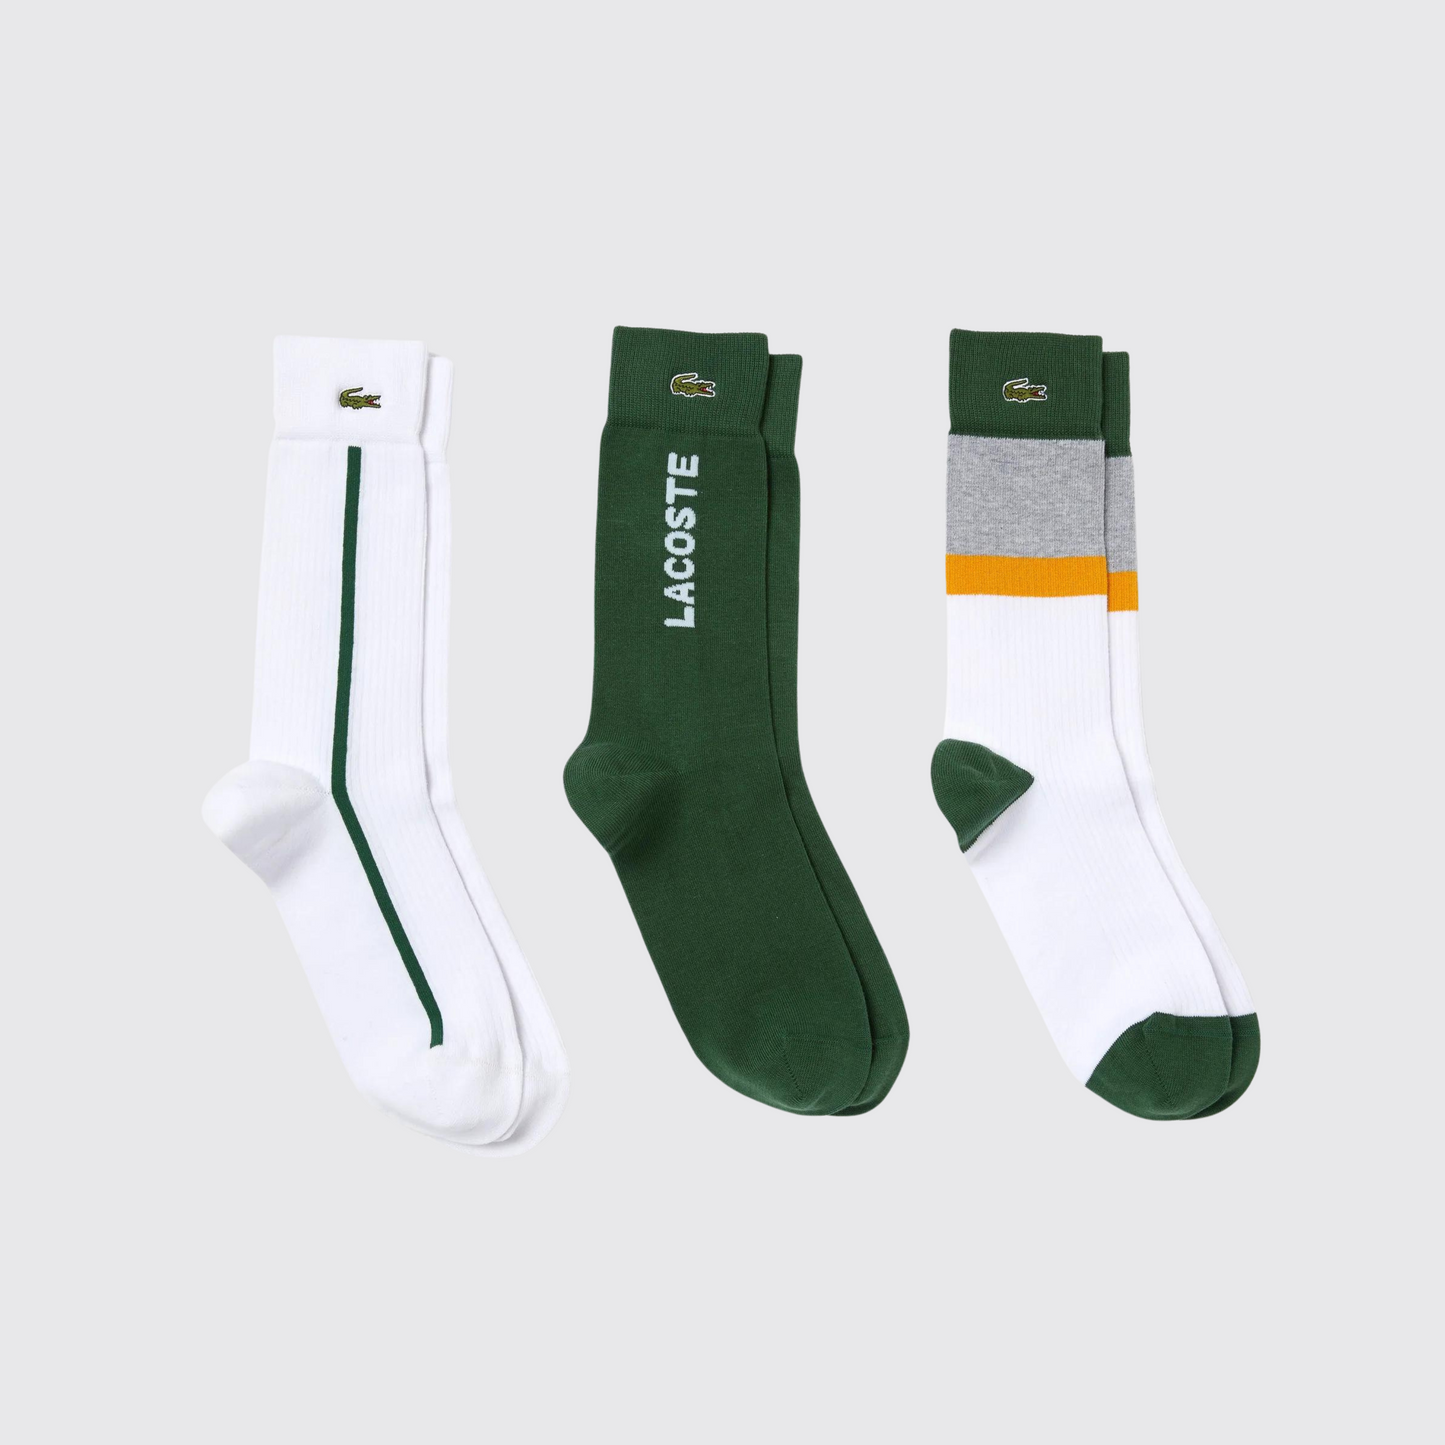 Lacoste Live Pack 3 Calcetines - RA4263-LLY - Colección Unisex 